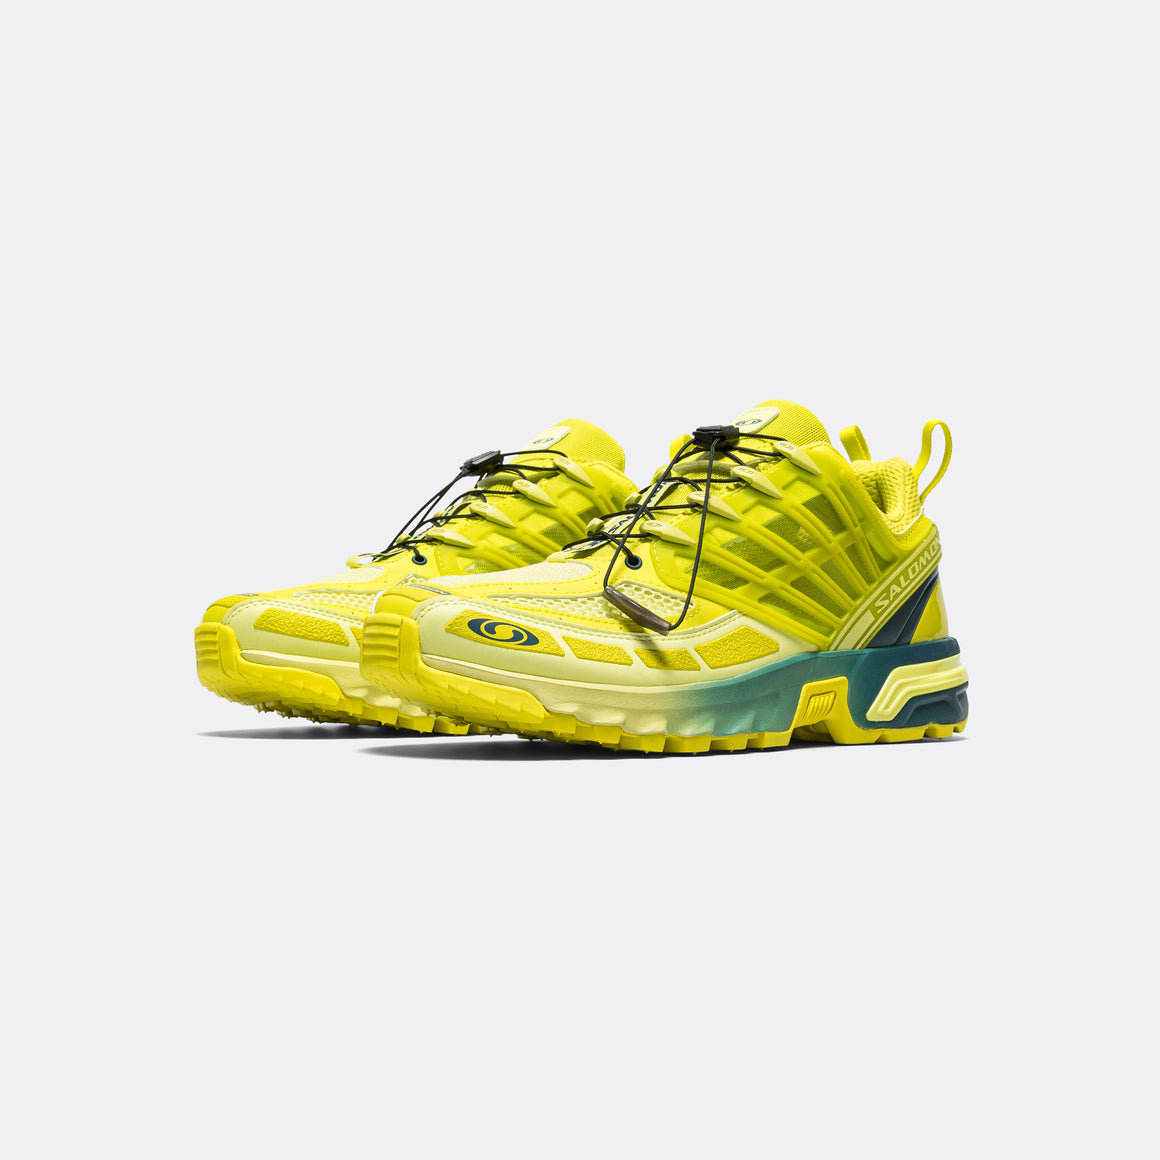 Salomon - ACS Pro - Sulphur Spring/Deep Dive-Sunny Lime - UP THERE